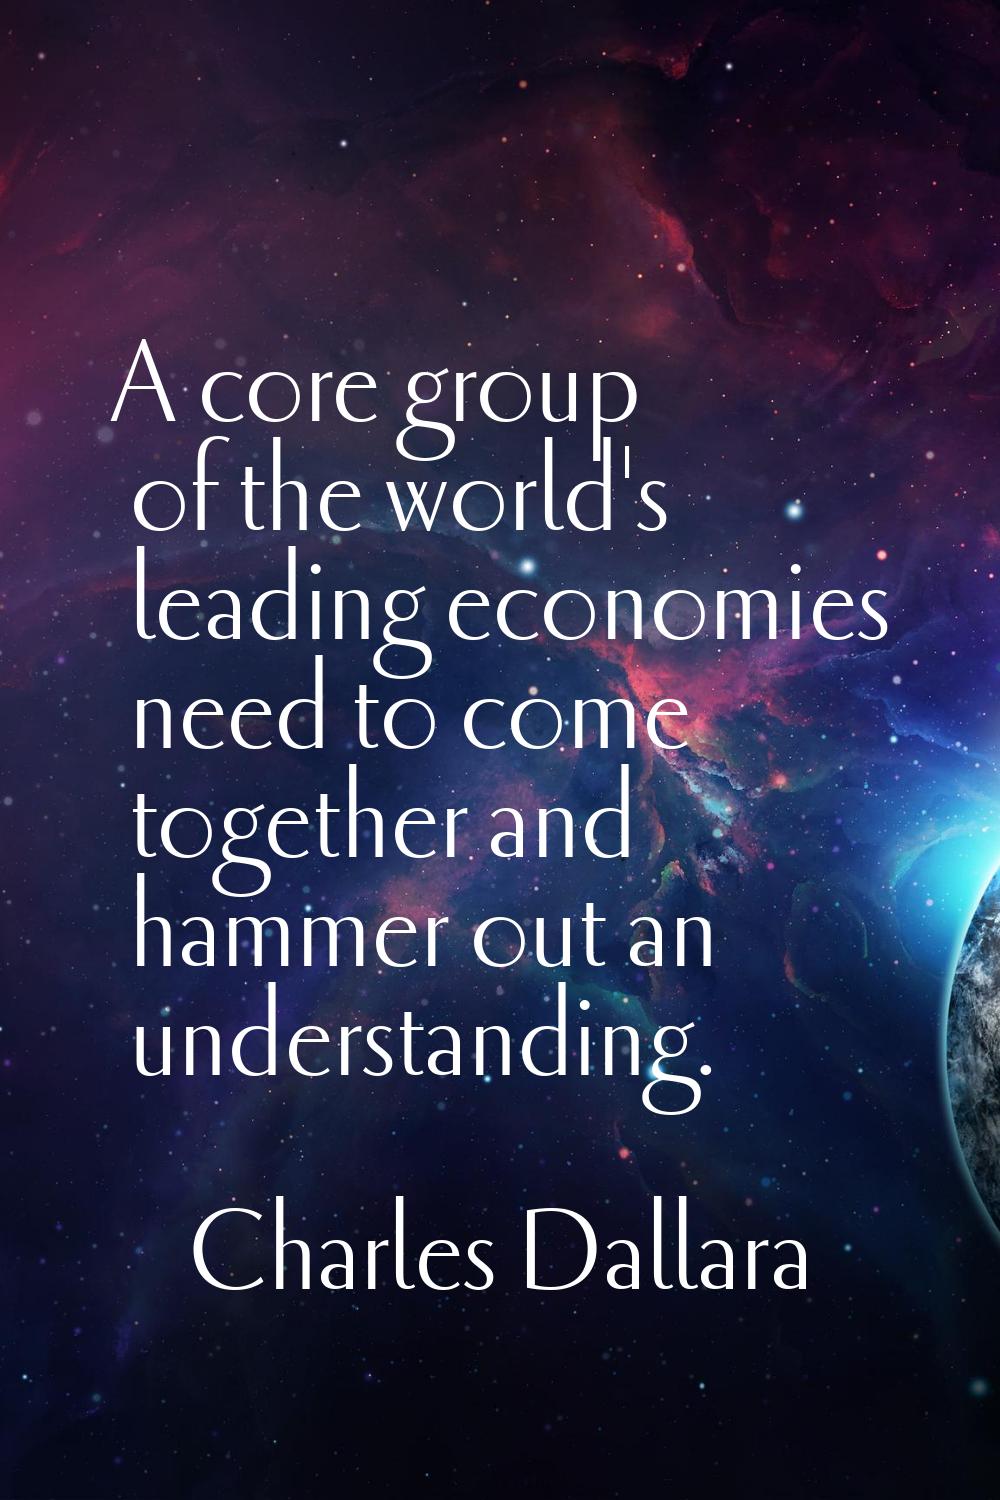 A core group of the world's leading economies need to come together and hammer out an understanding